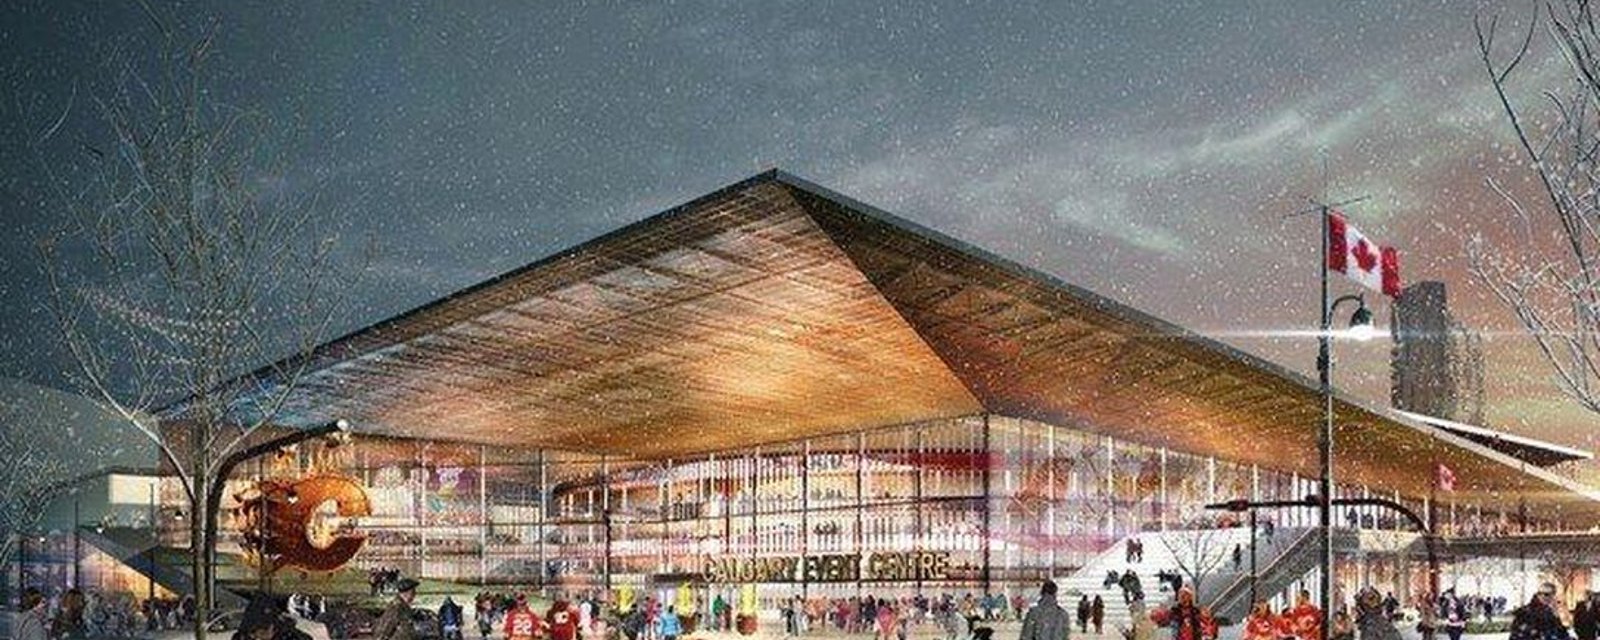 “Definitive agreements in place” for Calgary’s new arena